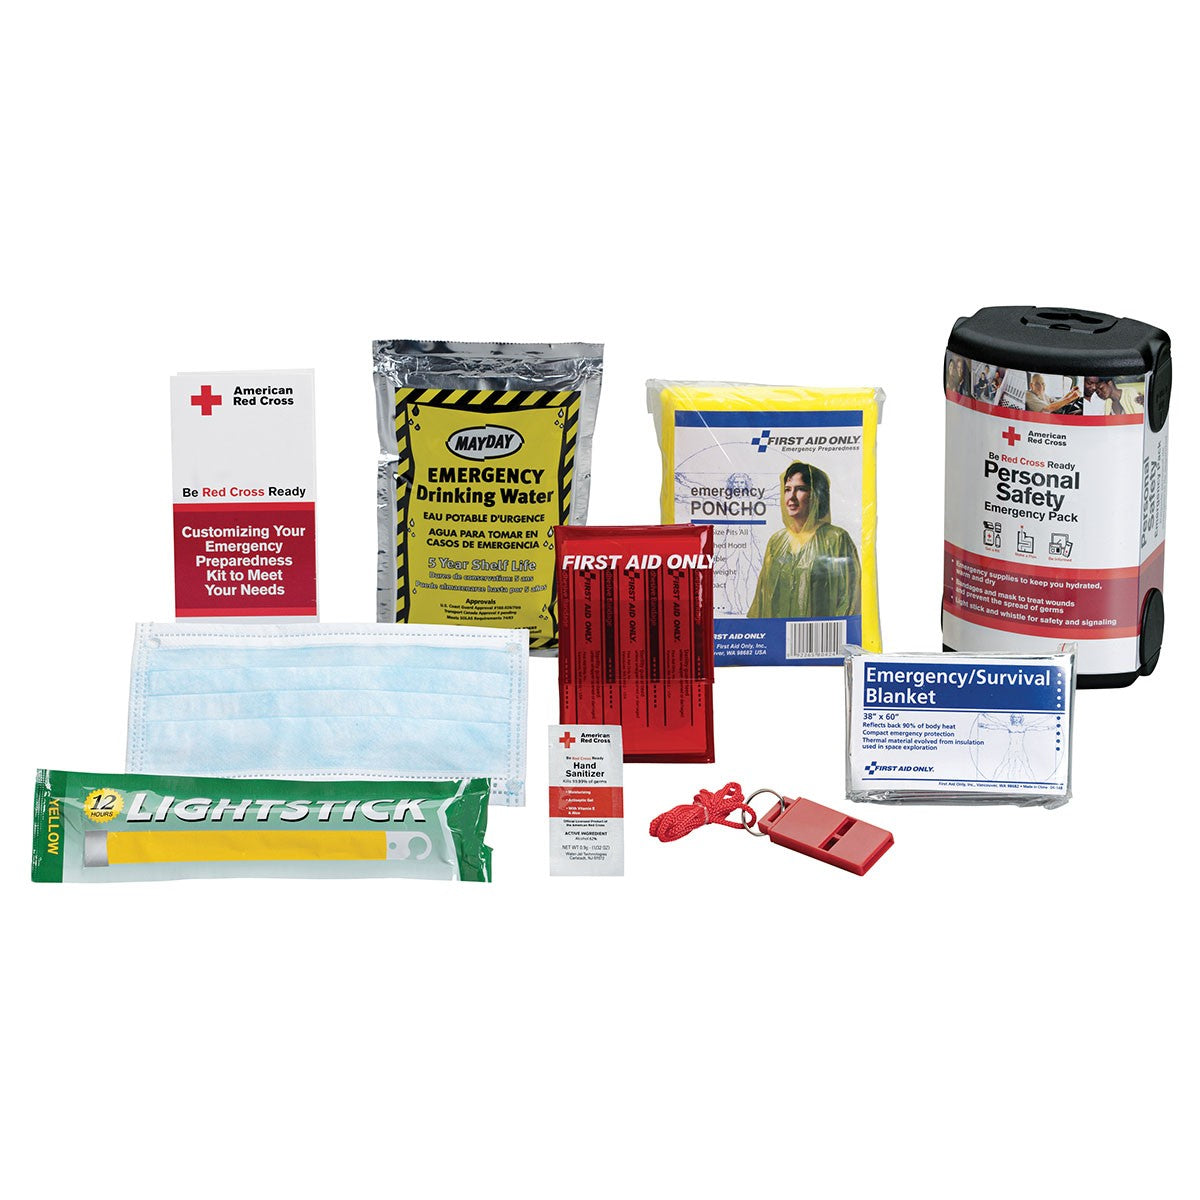 American Red Cross Personal Safety Emergency Pack - W-RC-612